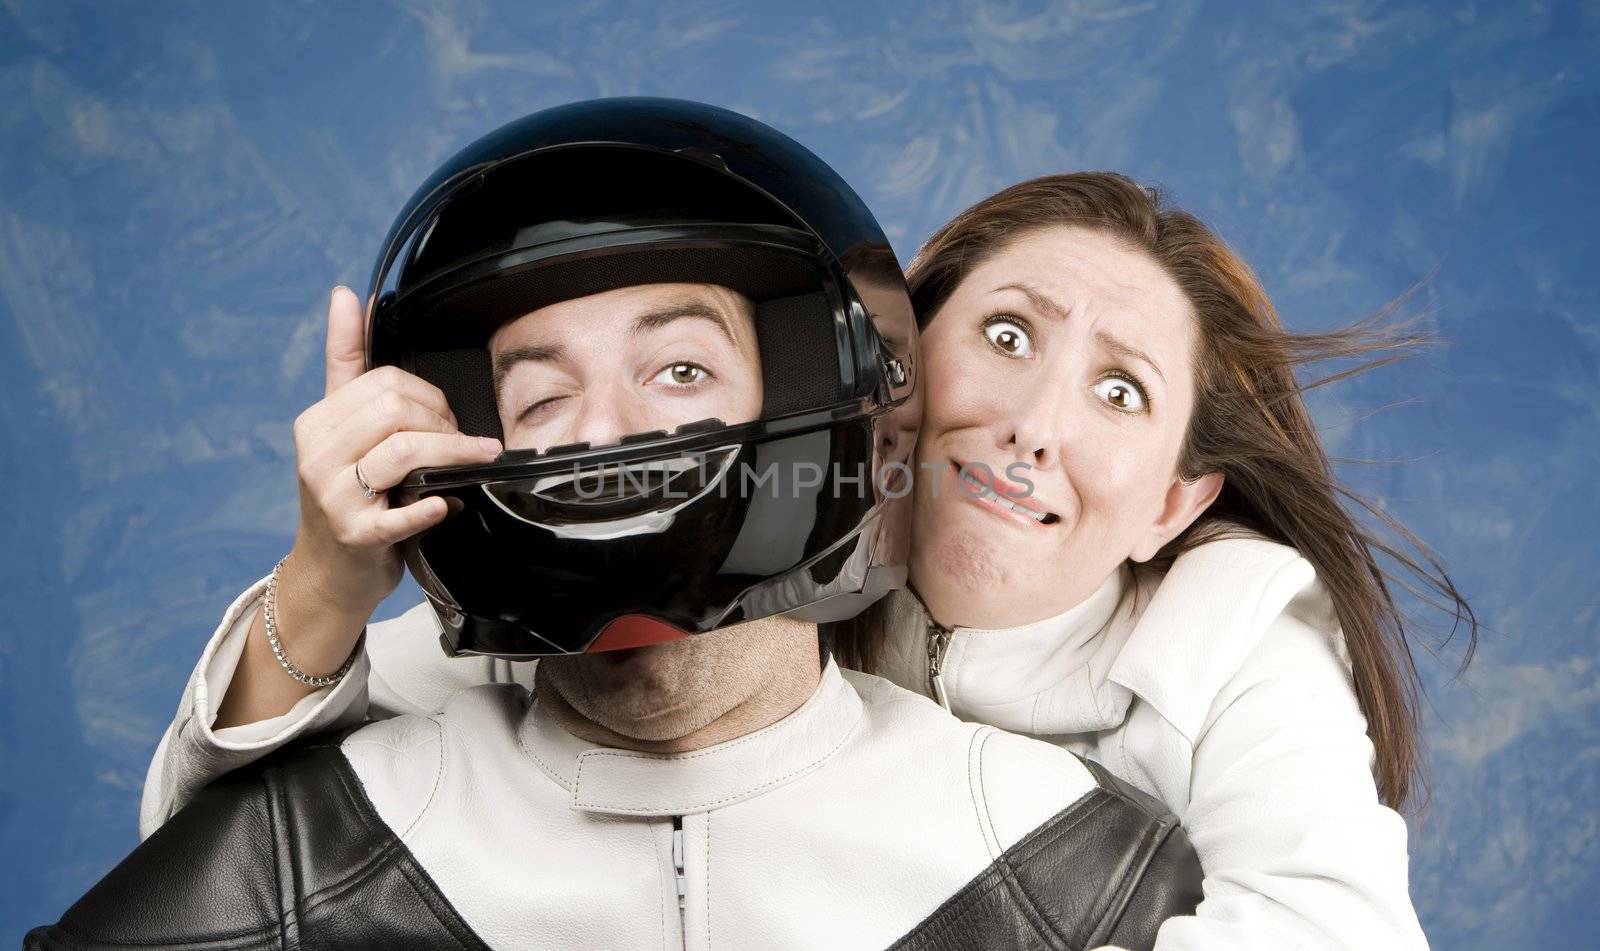 Man and fearful woman on a motorcycle in studio